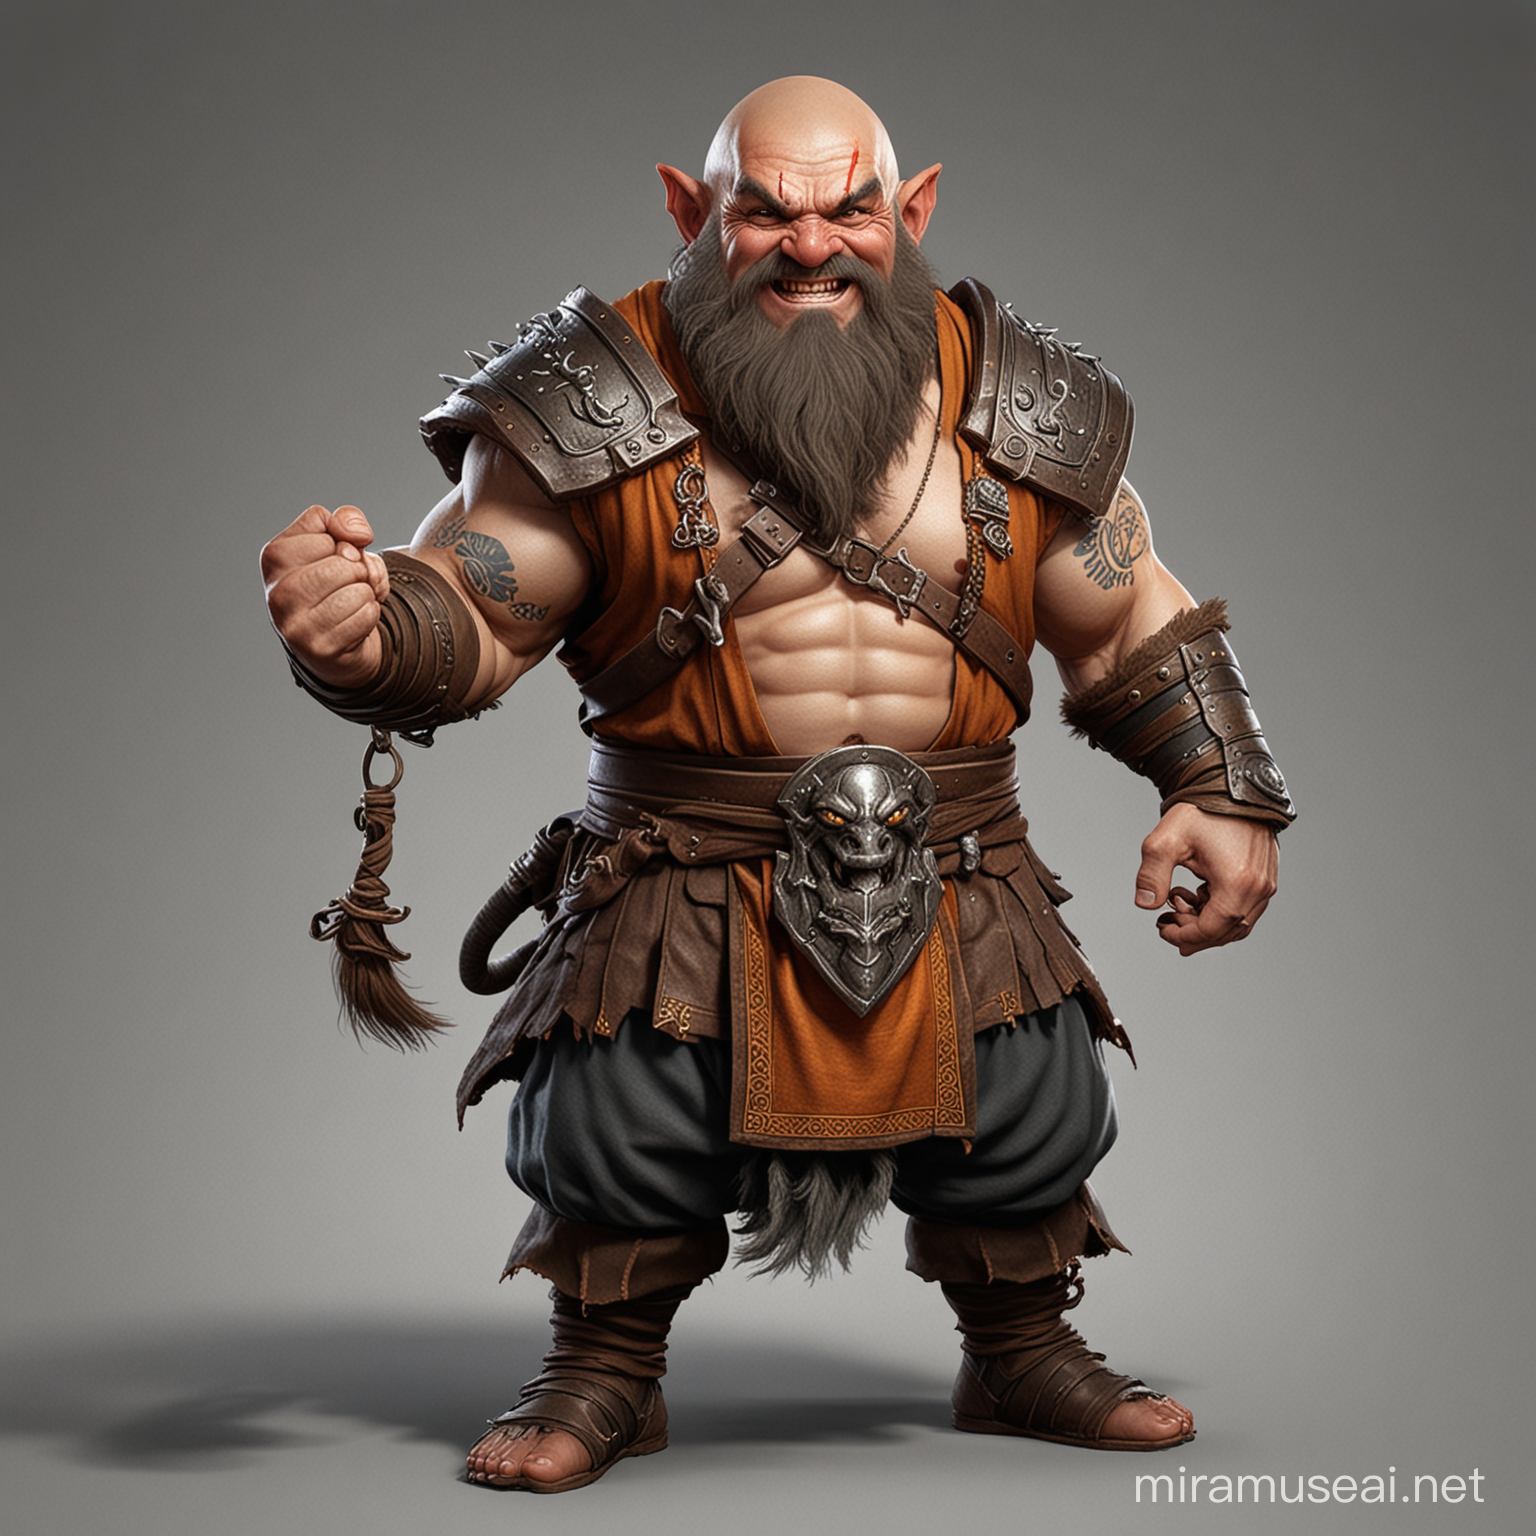 dwarf monk, strong, smirking, fighting stance, fully dressed, dragon theme